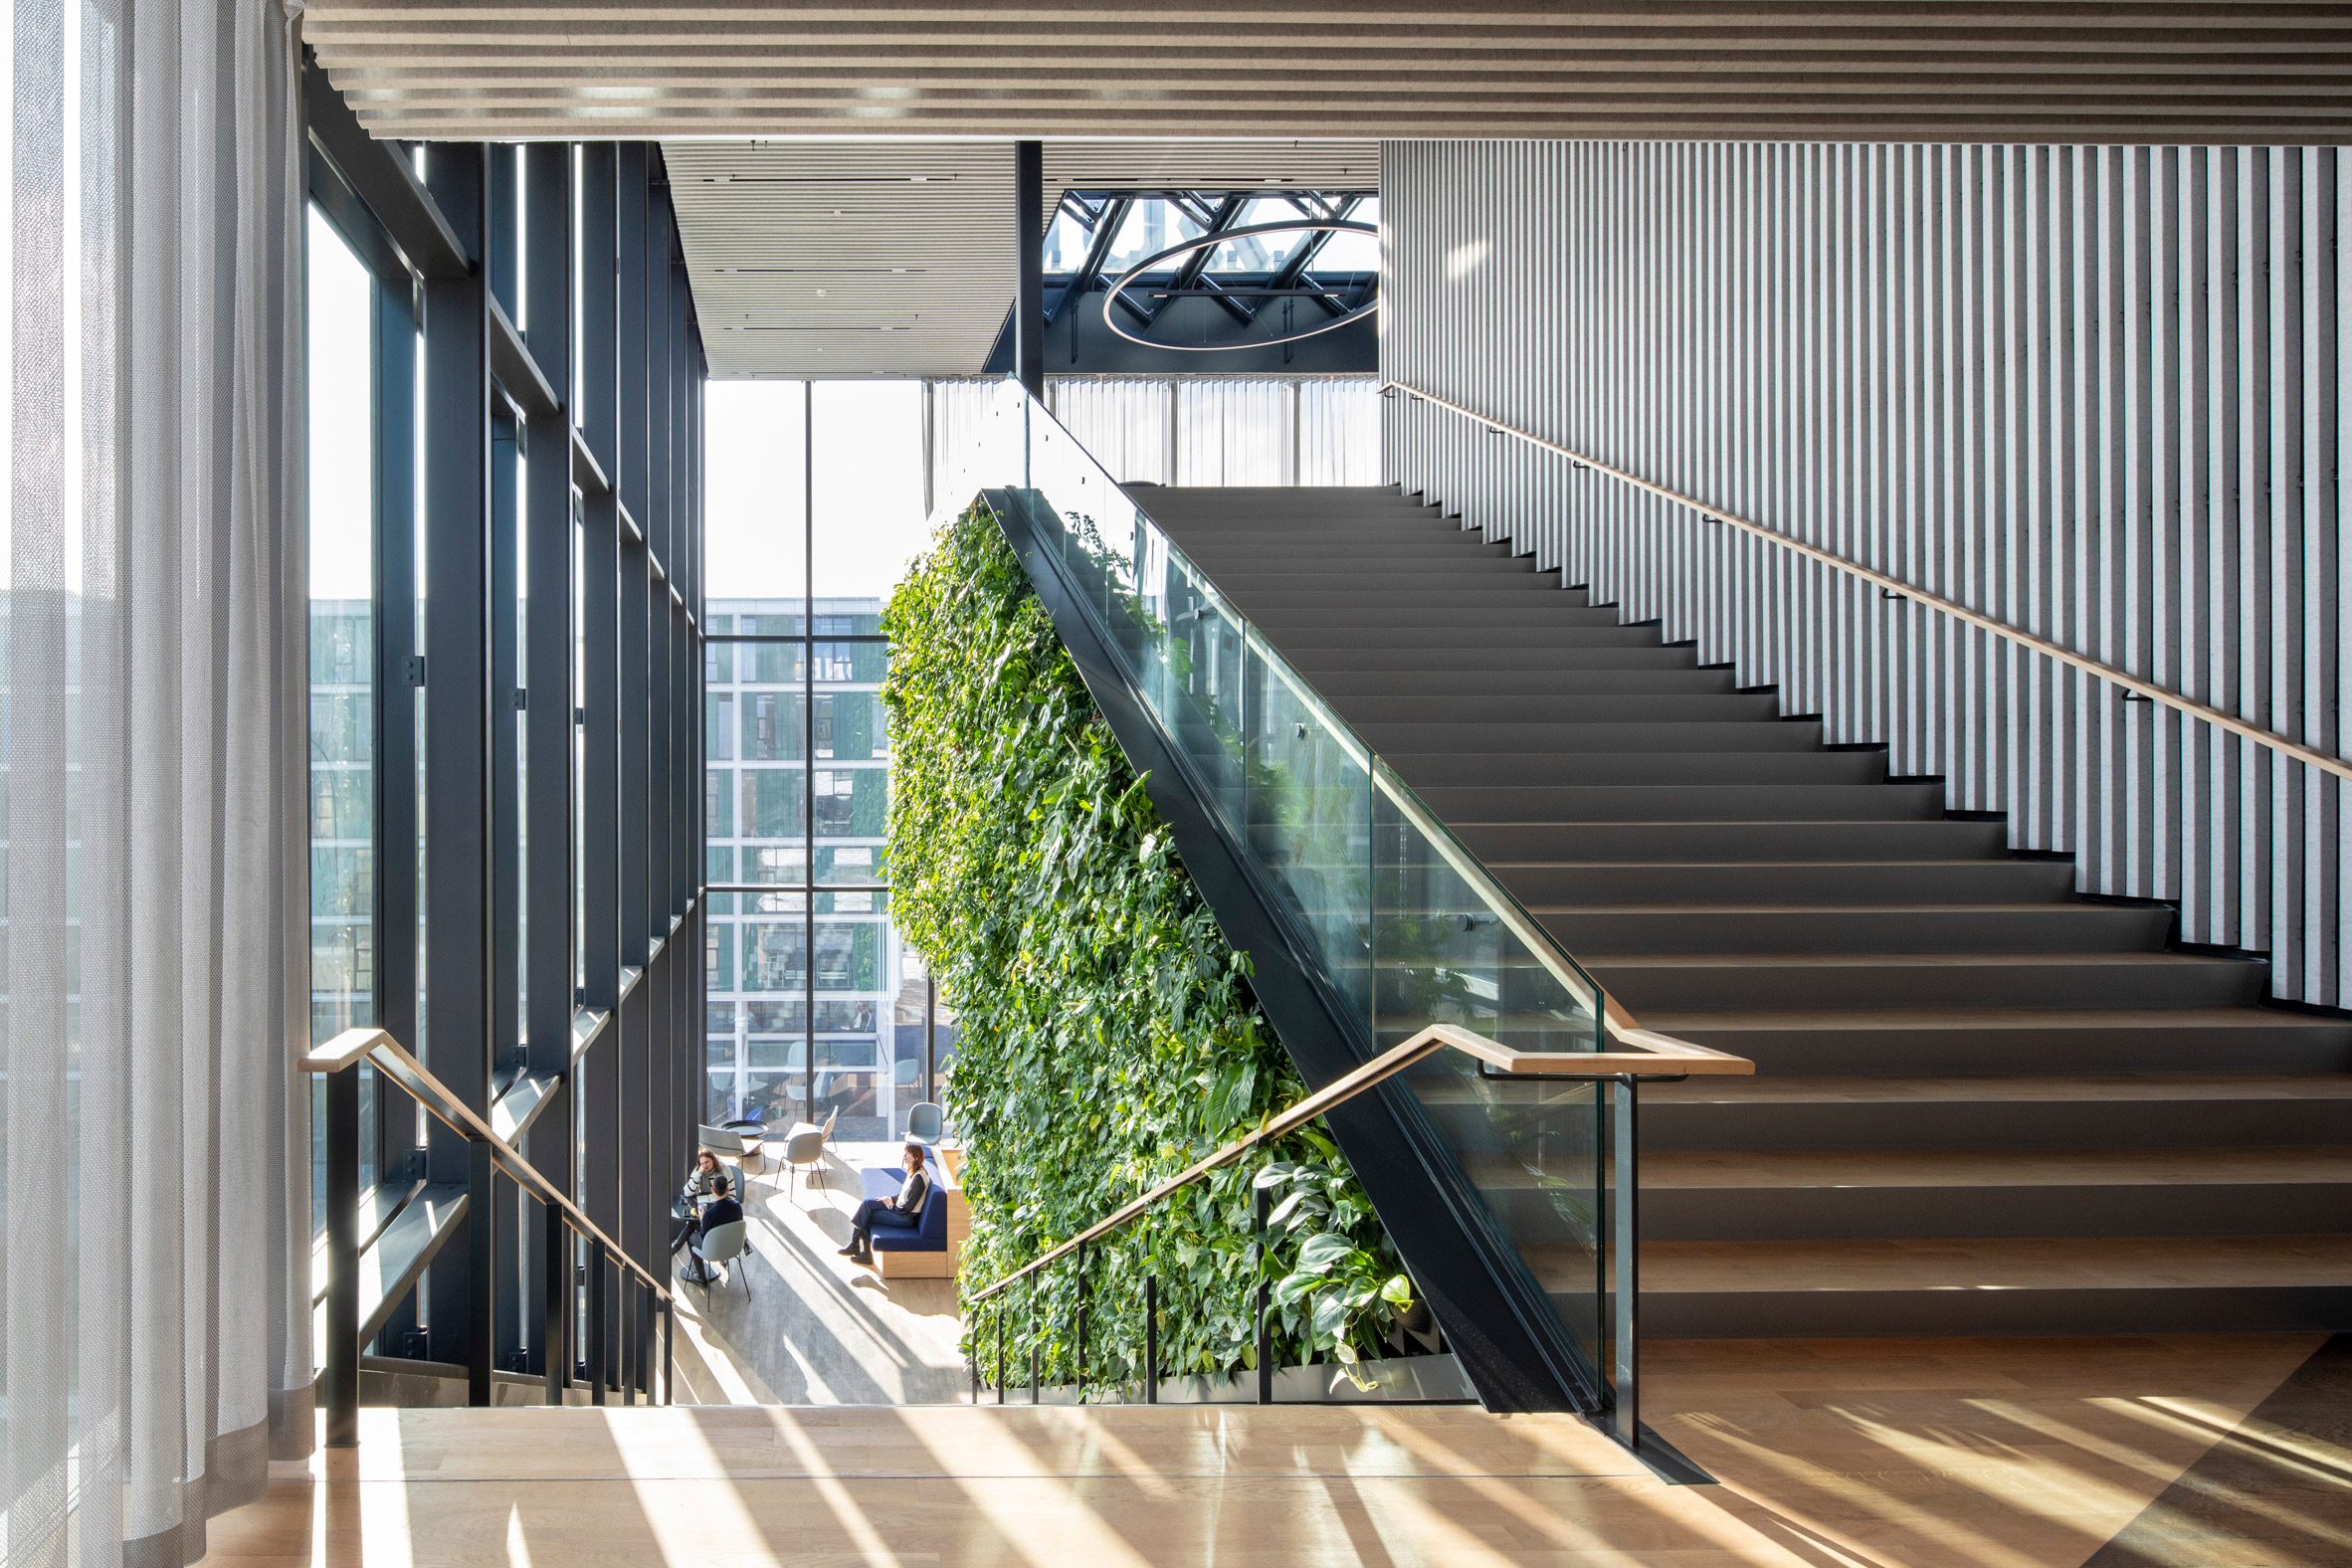 Large internal staircase with wood floors and green walls at the Matrix One building by MVRDV